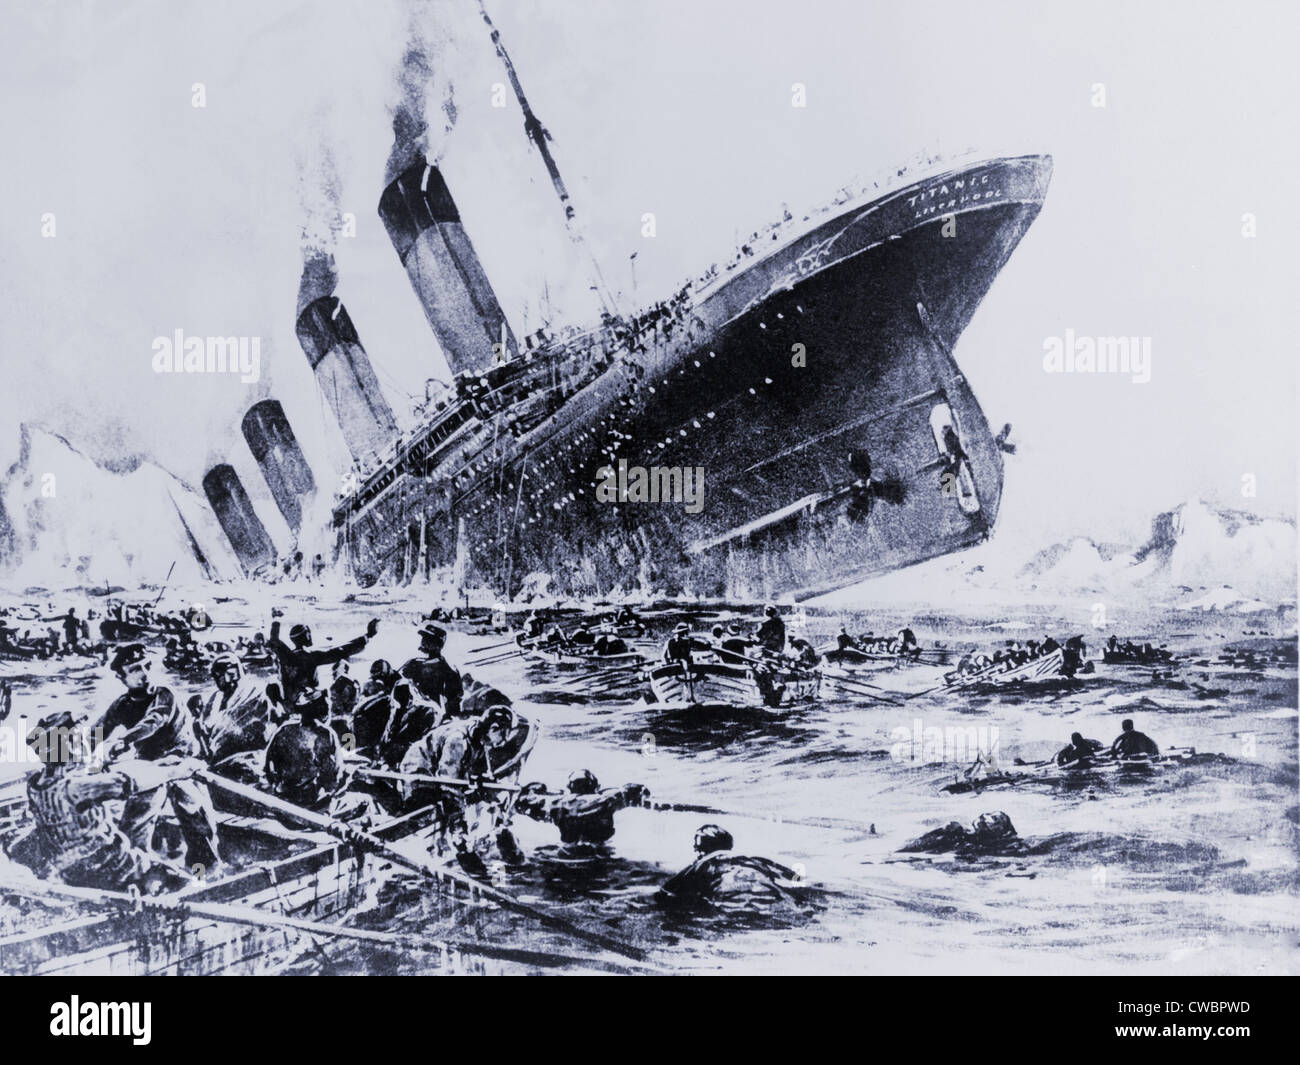 Sinking of the ocean liner the Titanic witnessed by survivors in lifeboats. May 15, 1912. Stock Photo